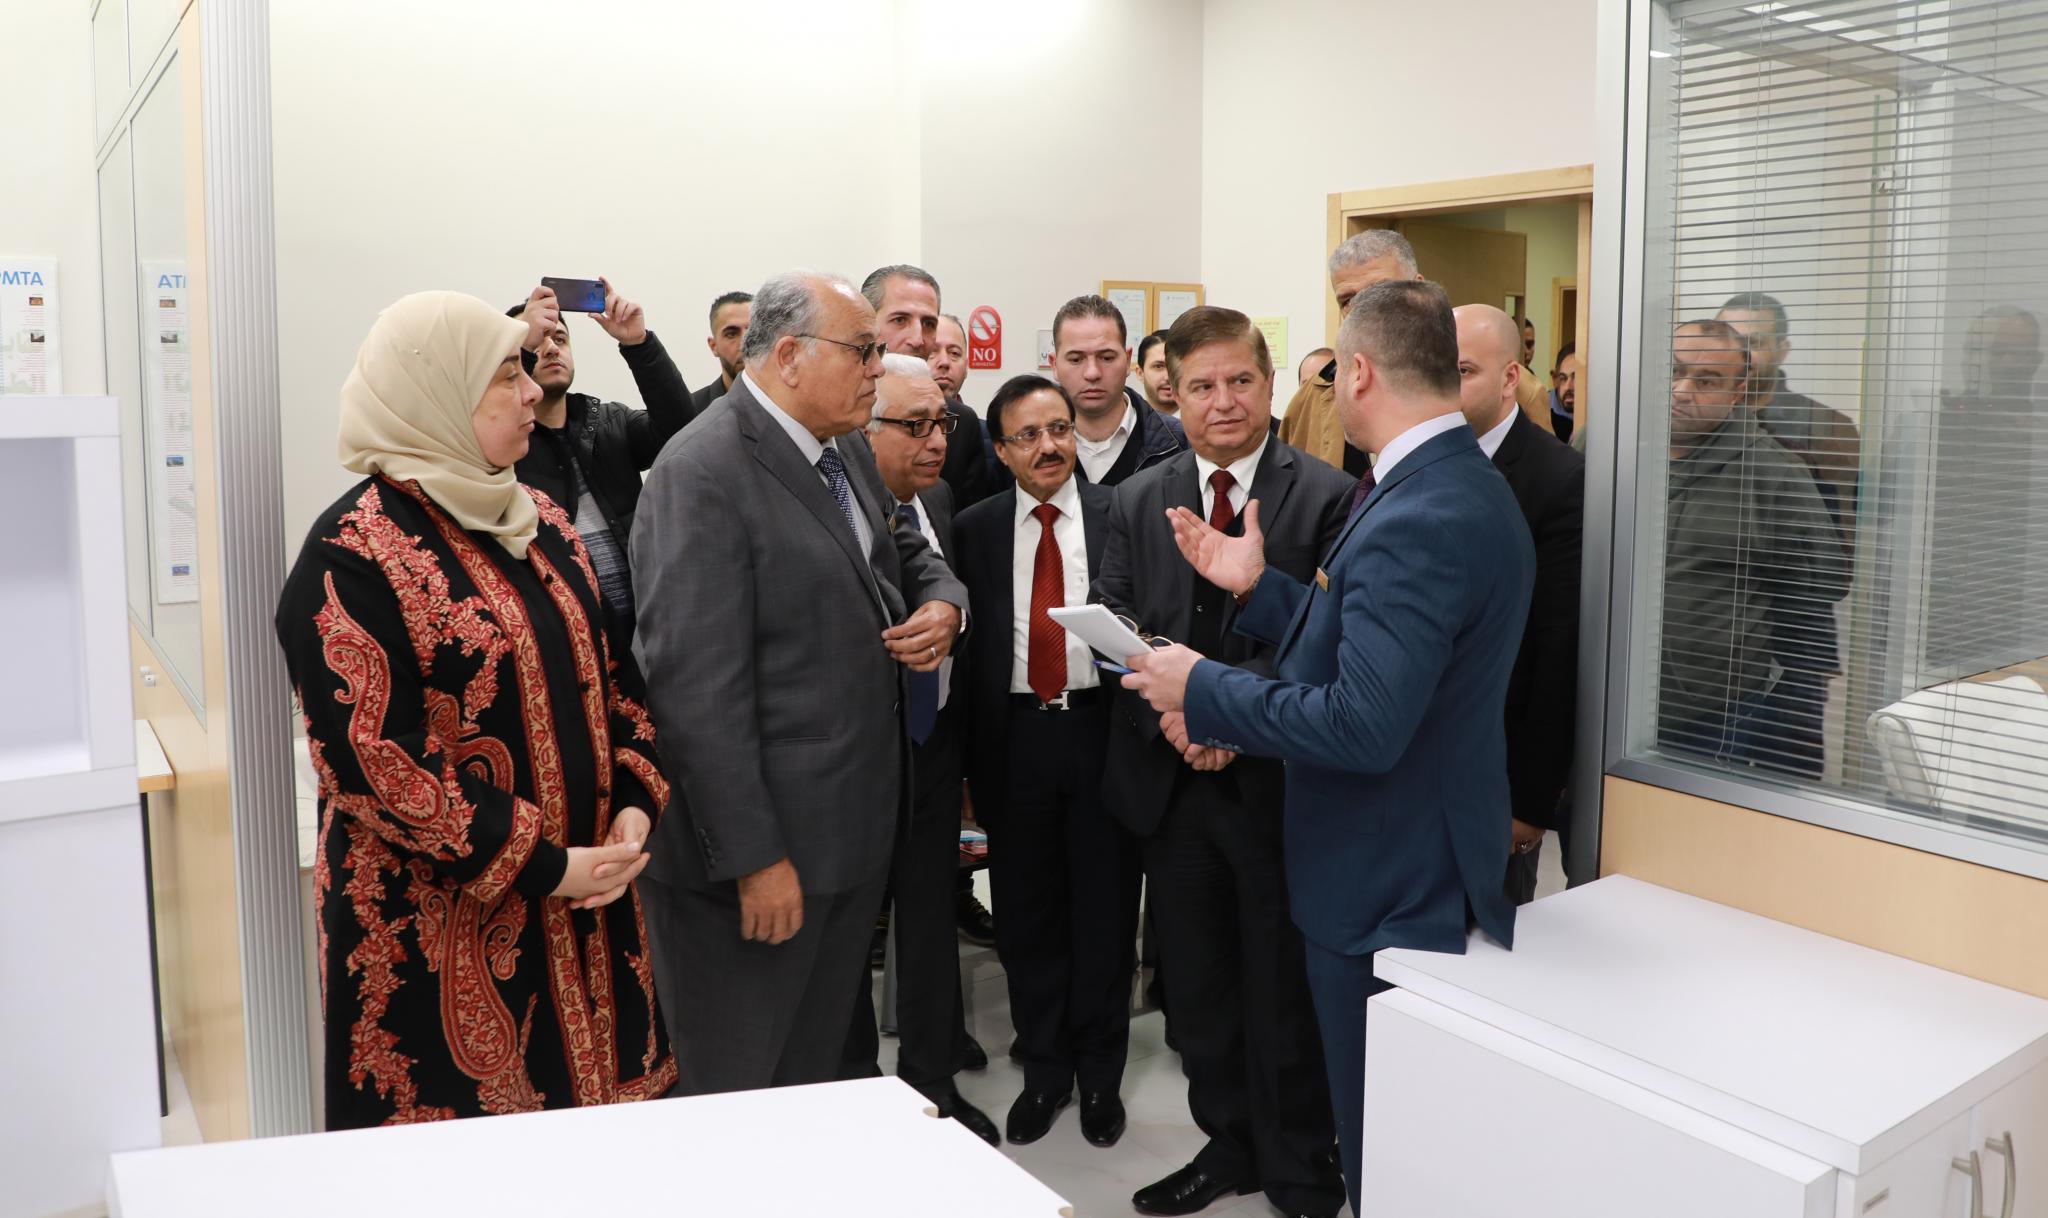 The Opening of the University’s Medical Center at Ramallah Campus